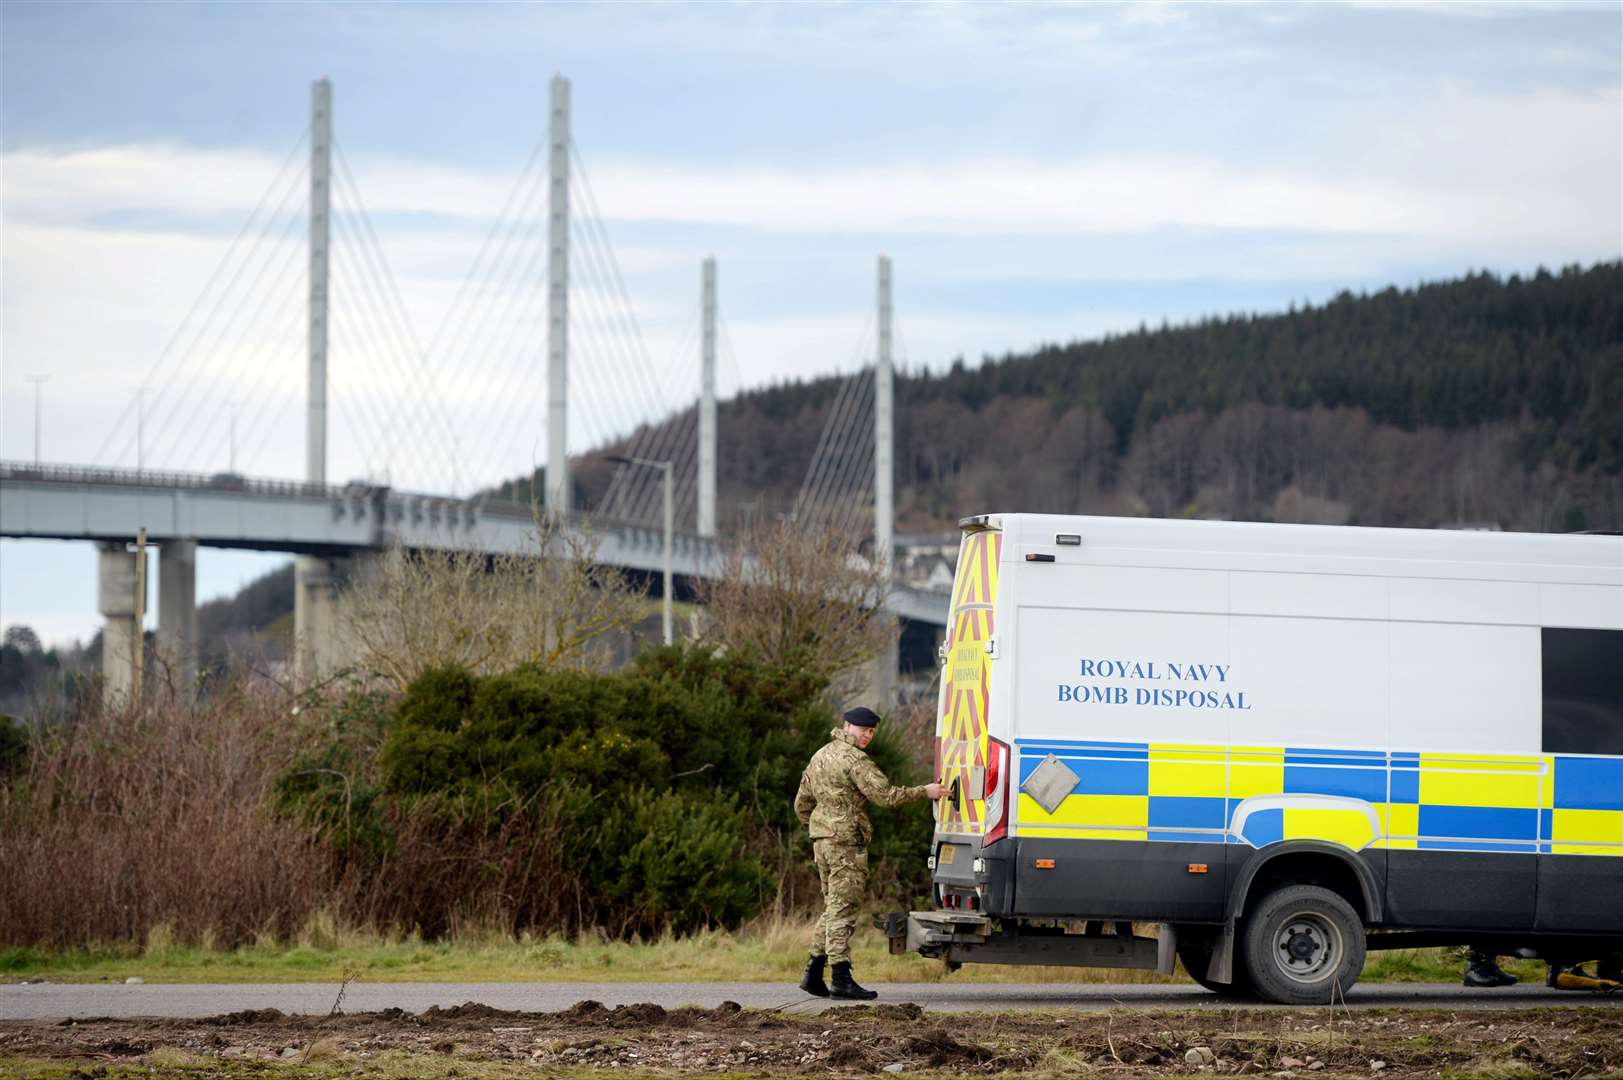 The Royal Navy bomb disposal team has arrived. Picture: James MacKenzie